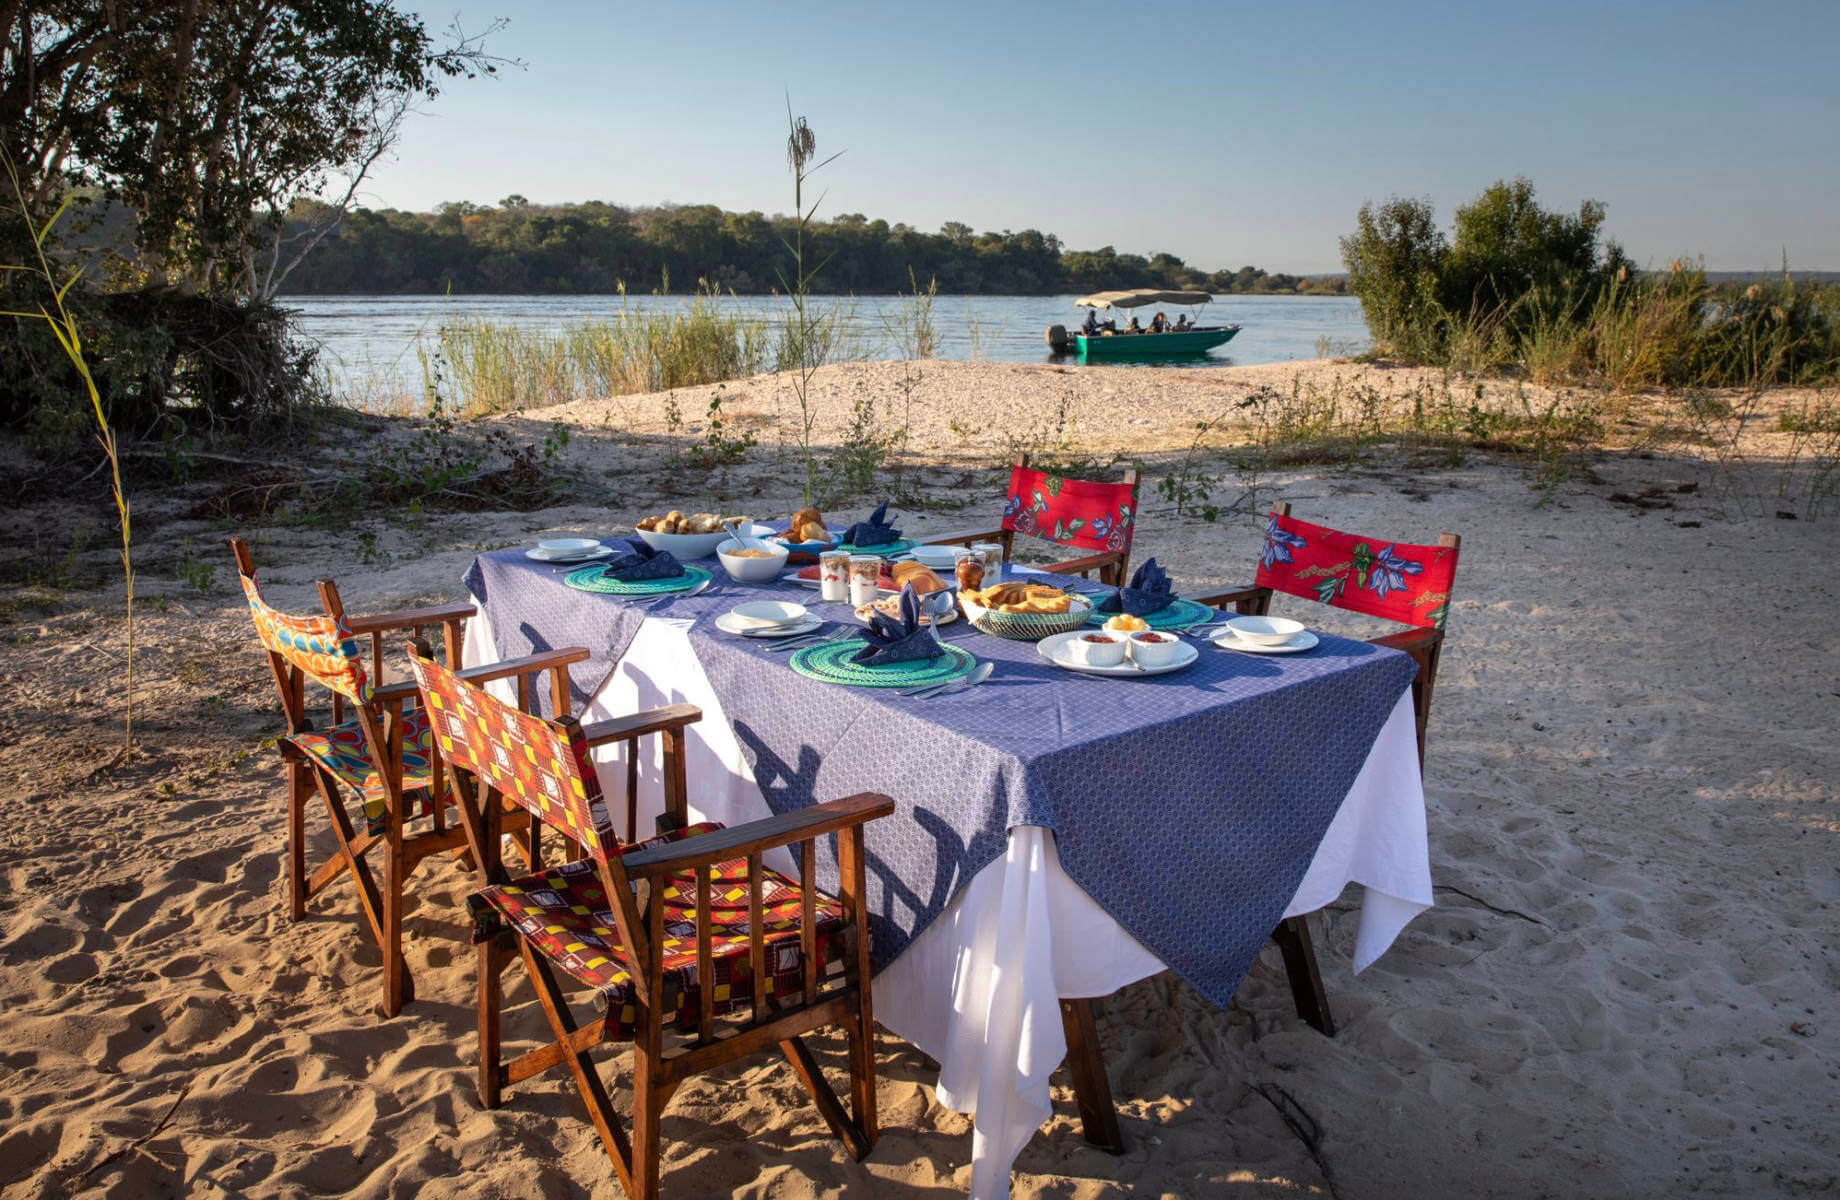 We are thrilled to be reviewing The River Club - an enchanting oasis in Livingstone, Zambia